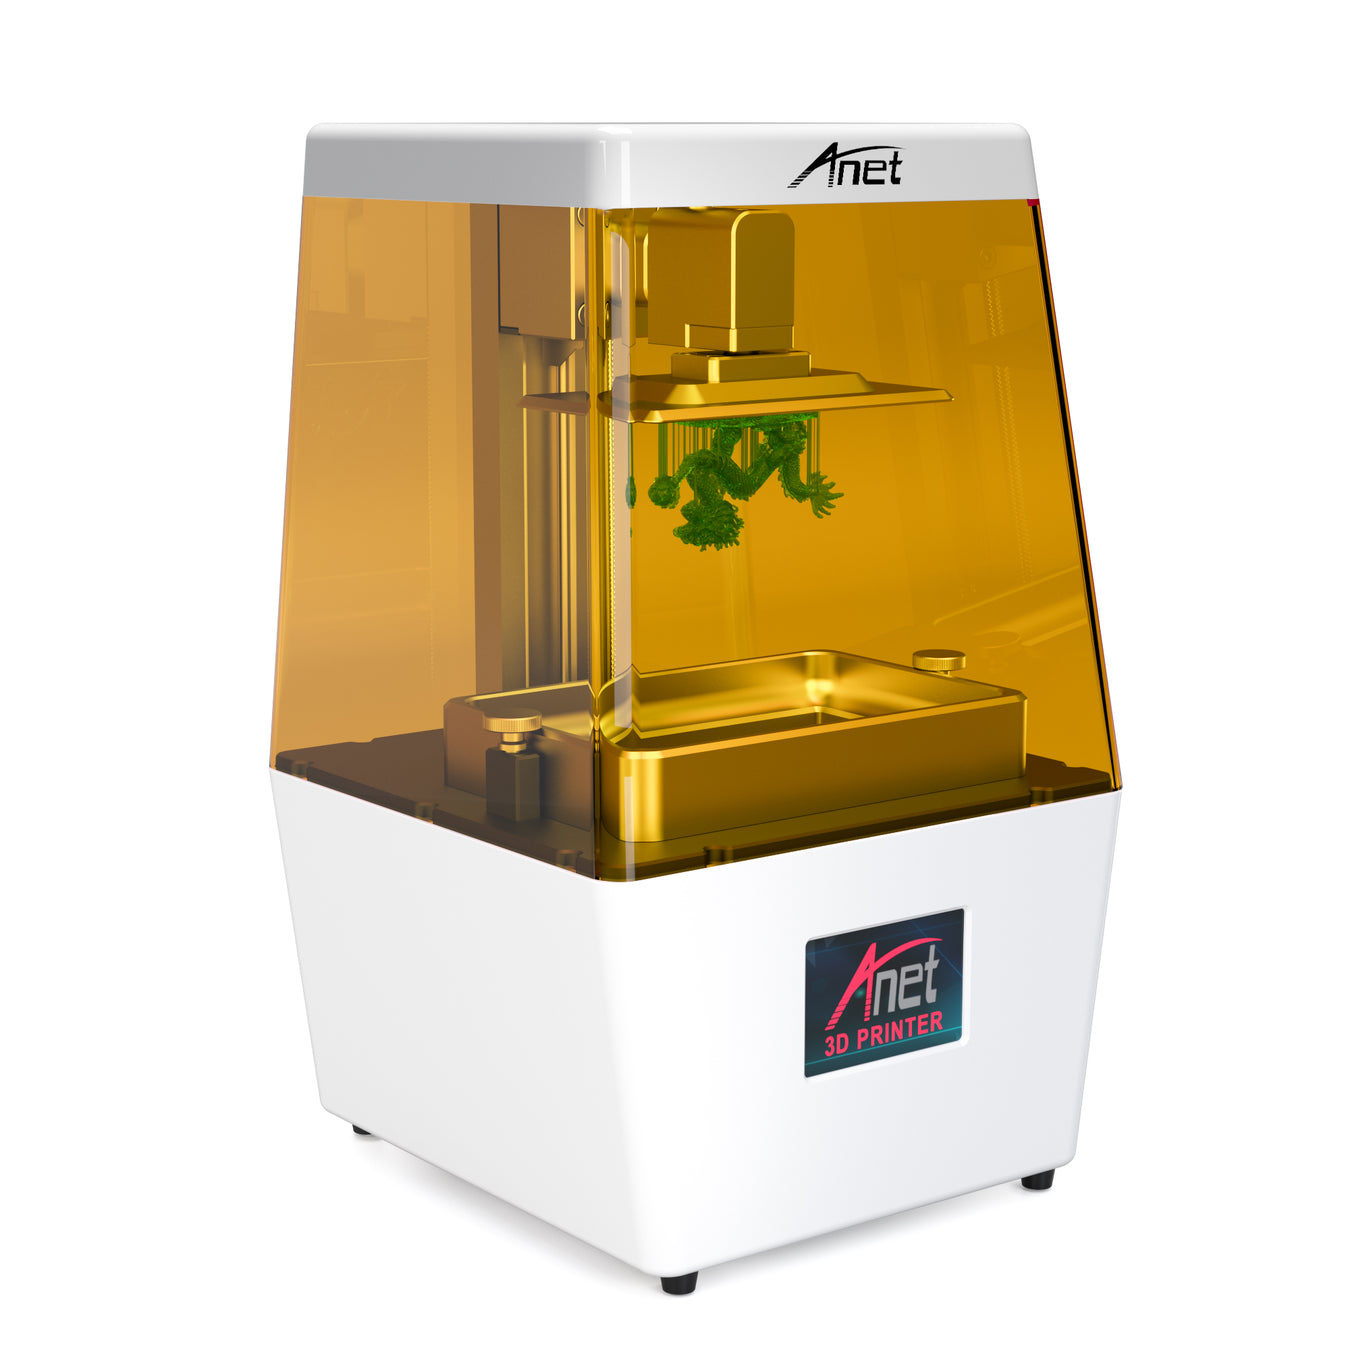 Anet 3D Printer Black Friday Sale in 2021